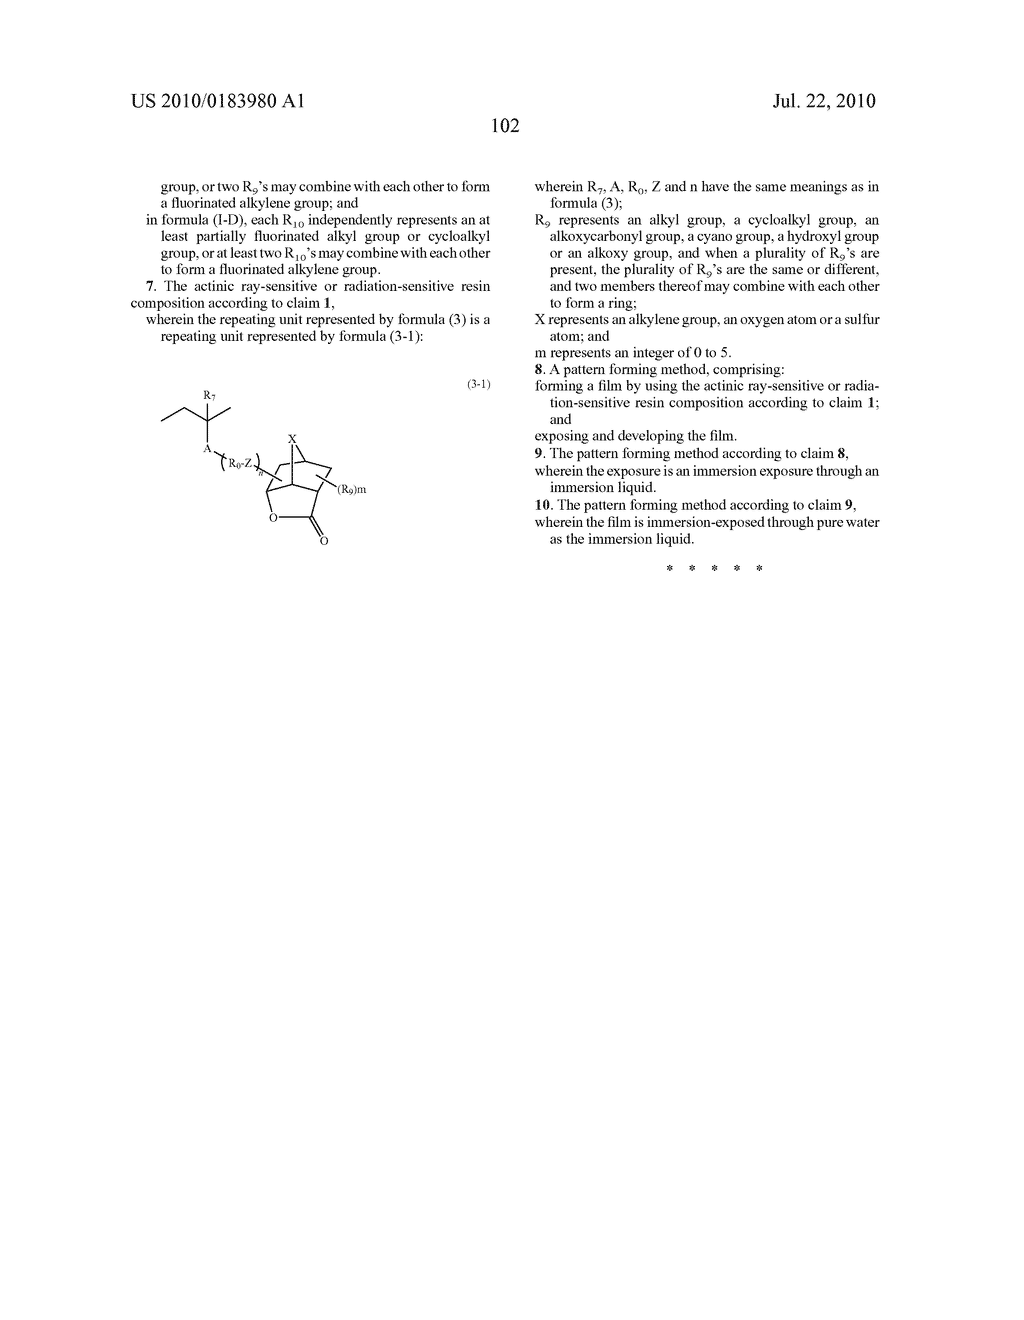 ACTINIC RAY-SENSITIVE OR RADIATION-SENSITIVE RESIN COMPOSITION AND PATTERN FORMING METHOD USING THE SAME - diagram, schematic, and image 103